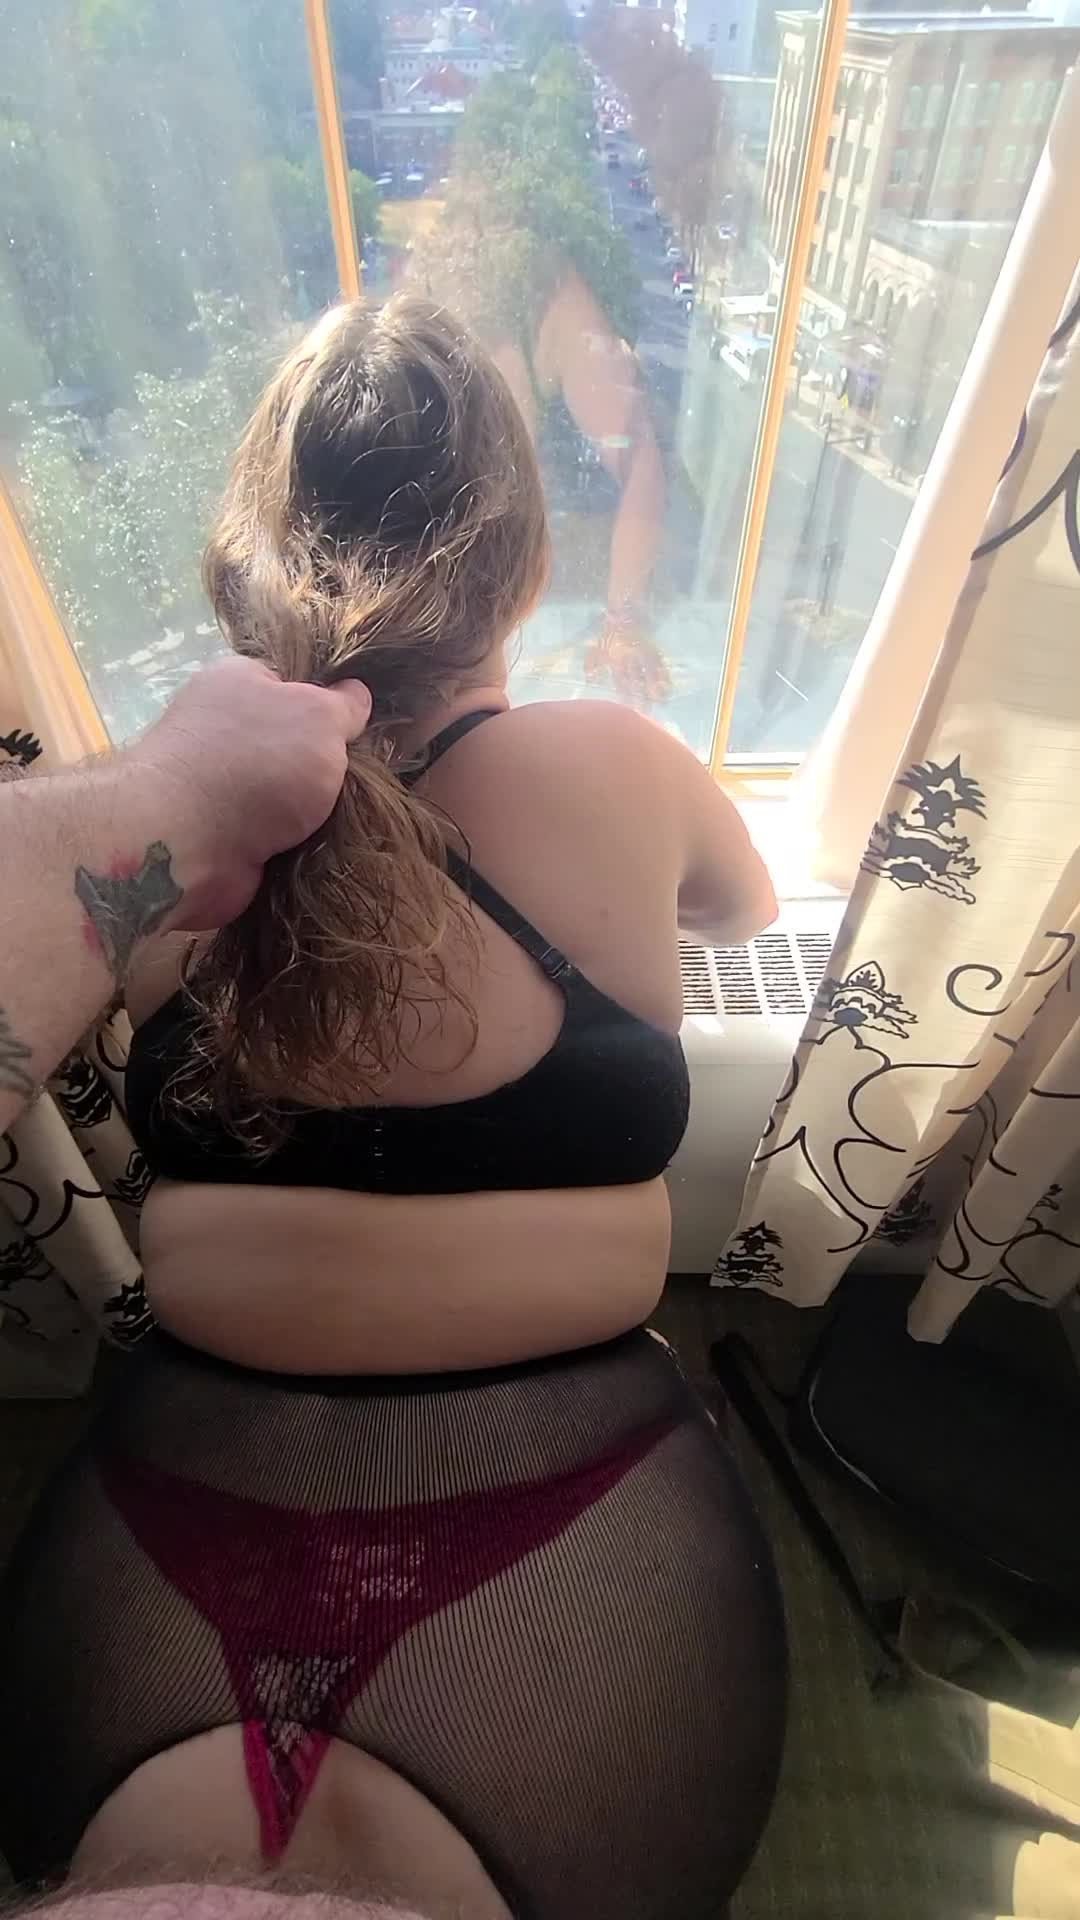 Video by ExhibCouplePlayTime with the username @ExhibCouplePlayTime, who is a verified user,  January 7, 2024 at 4:06 PM. The post is about the topic MILF and the text says 'Nothing like a creampie in the window for people to see!'